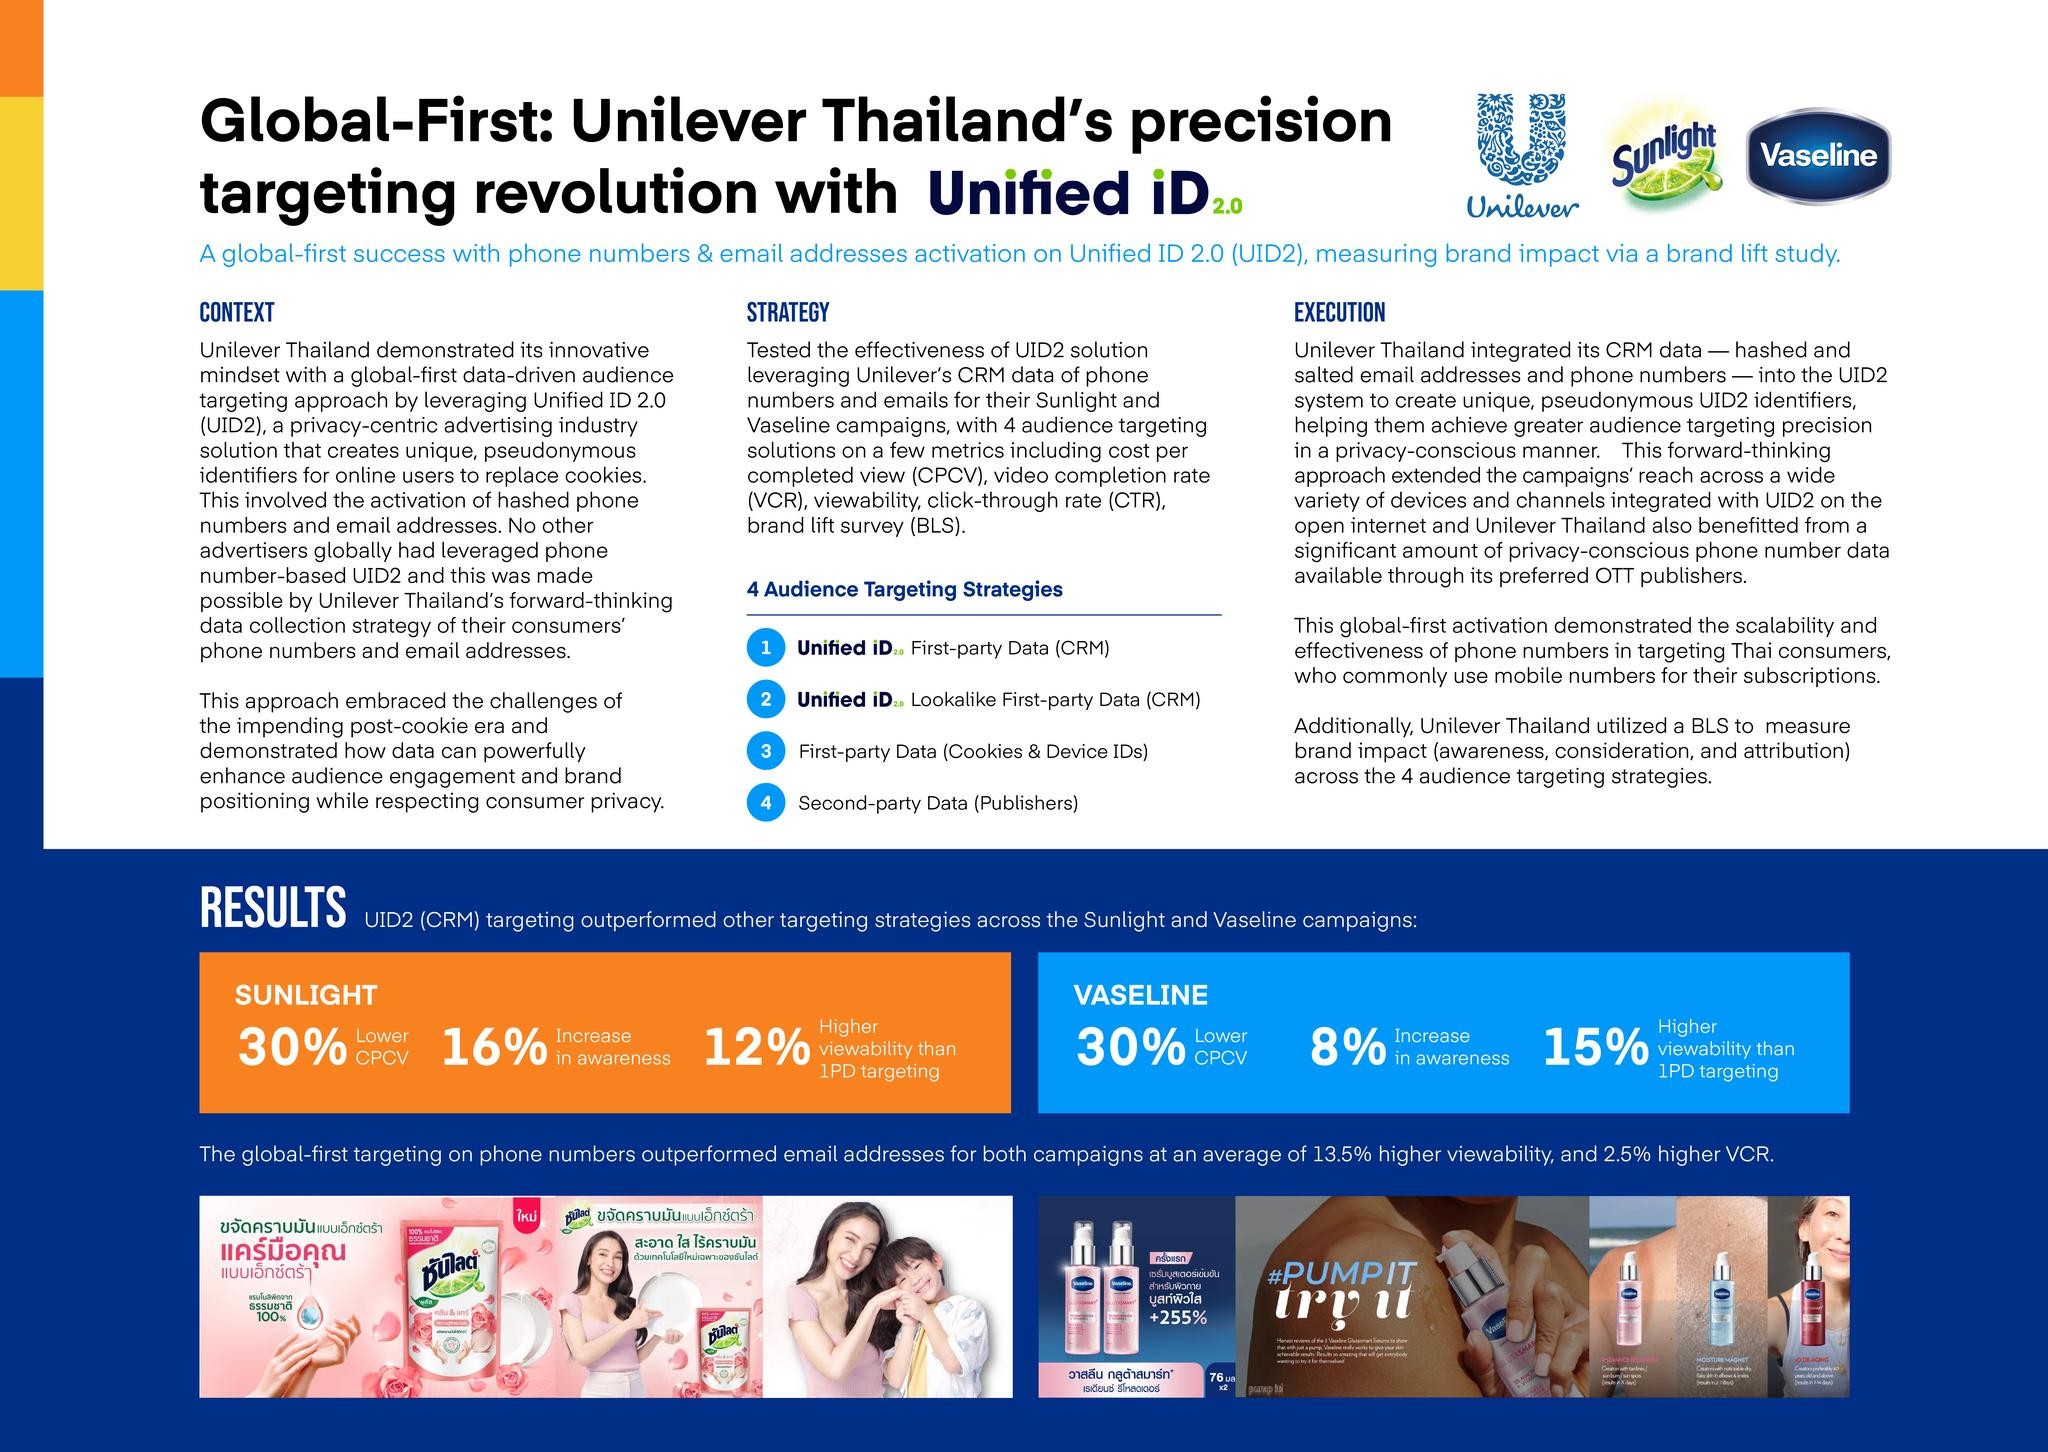 GLOBAL-FIRST: UNILEVER THAILAND'S PRECISION TARGETING REVOLUTION WITH UNIFIED ID 2.0